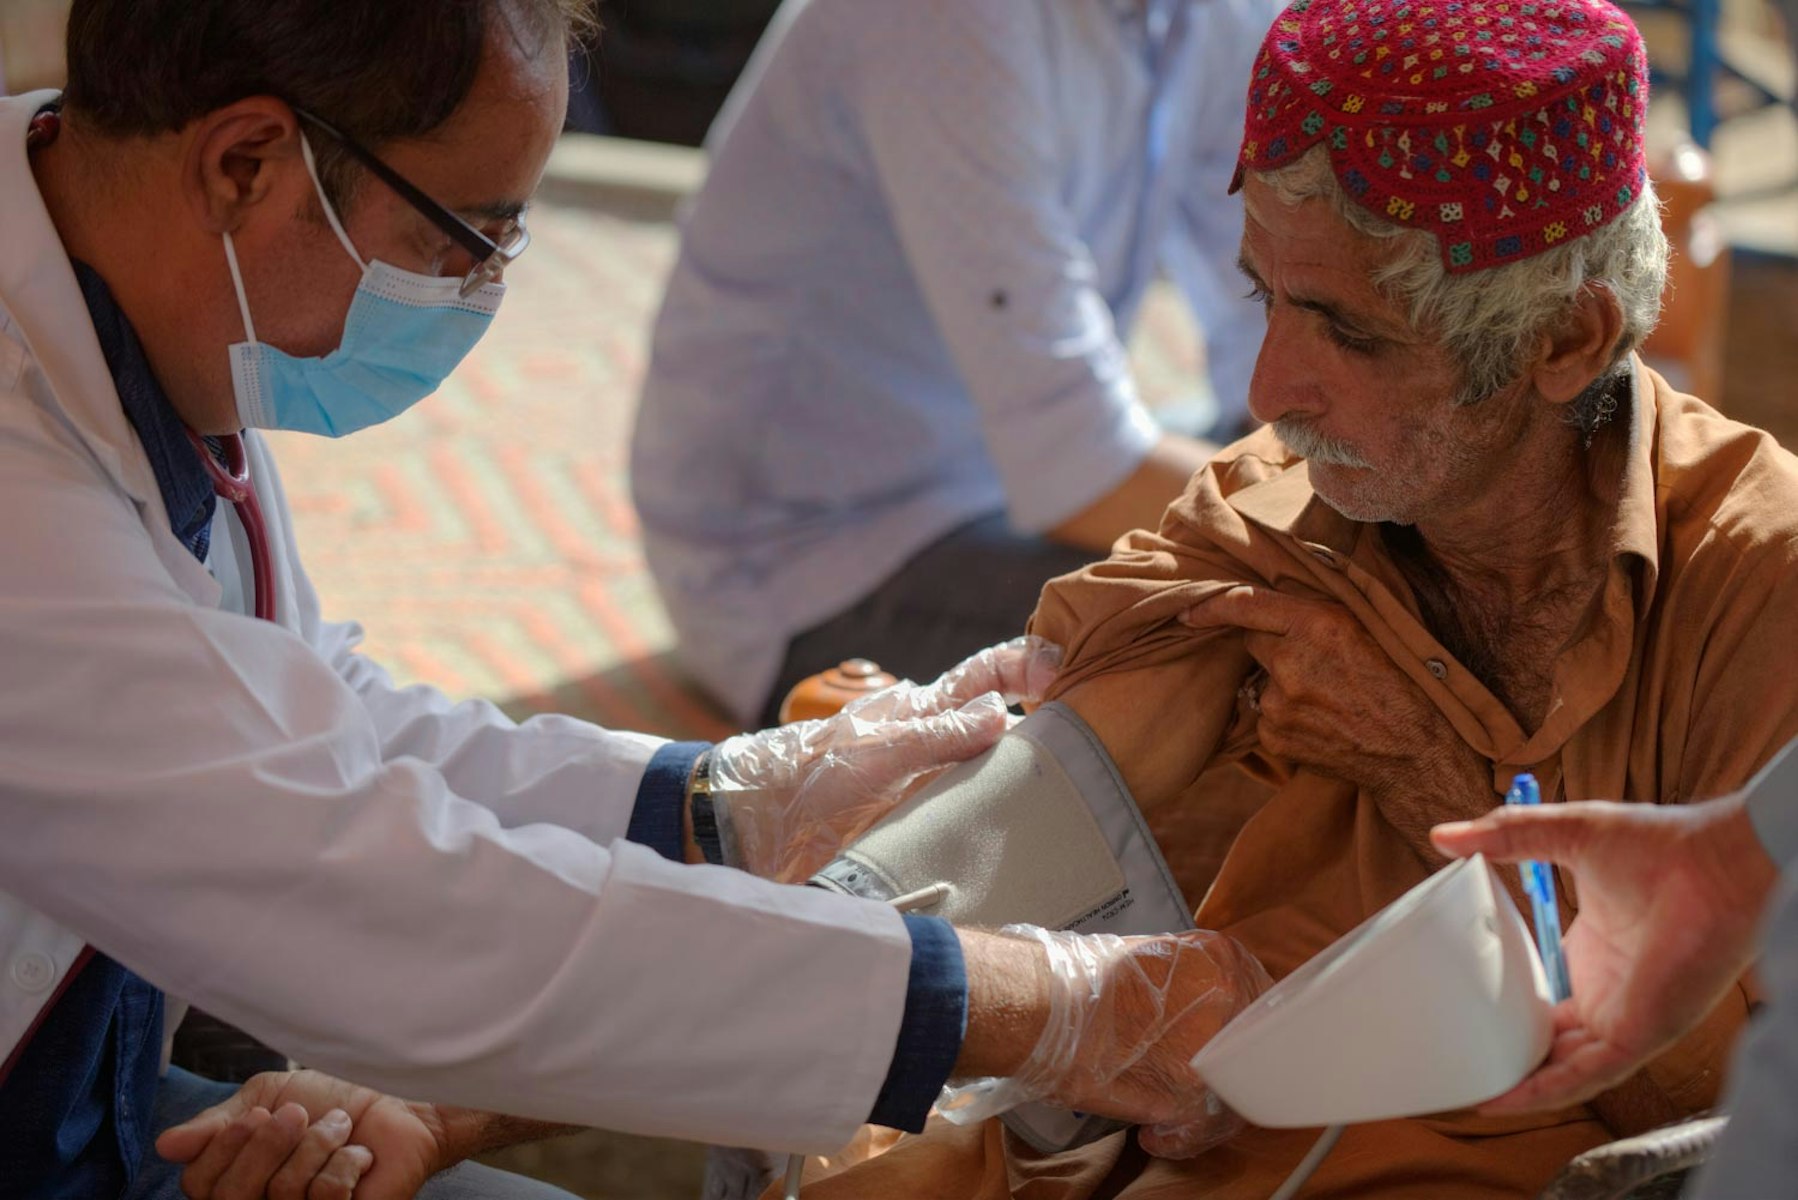 AKU healthcare camps and mobile units have provided care to over 52,000 people in 18 districts. AKU / Kohi Marri